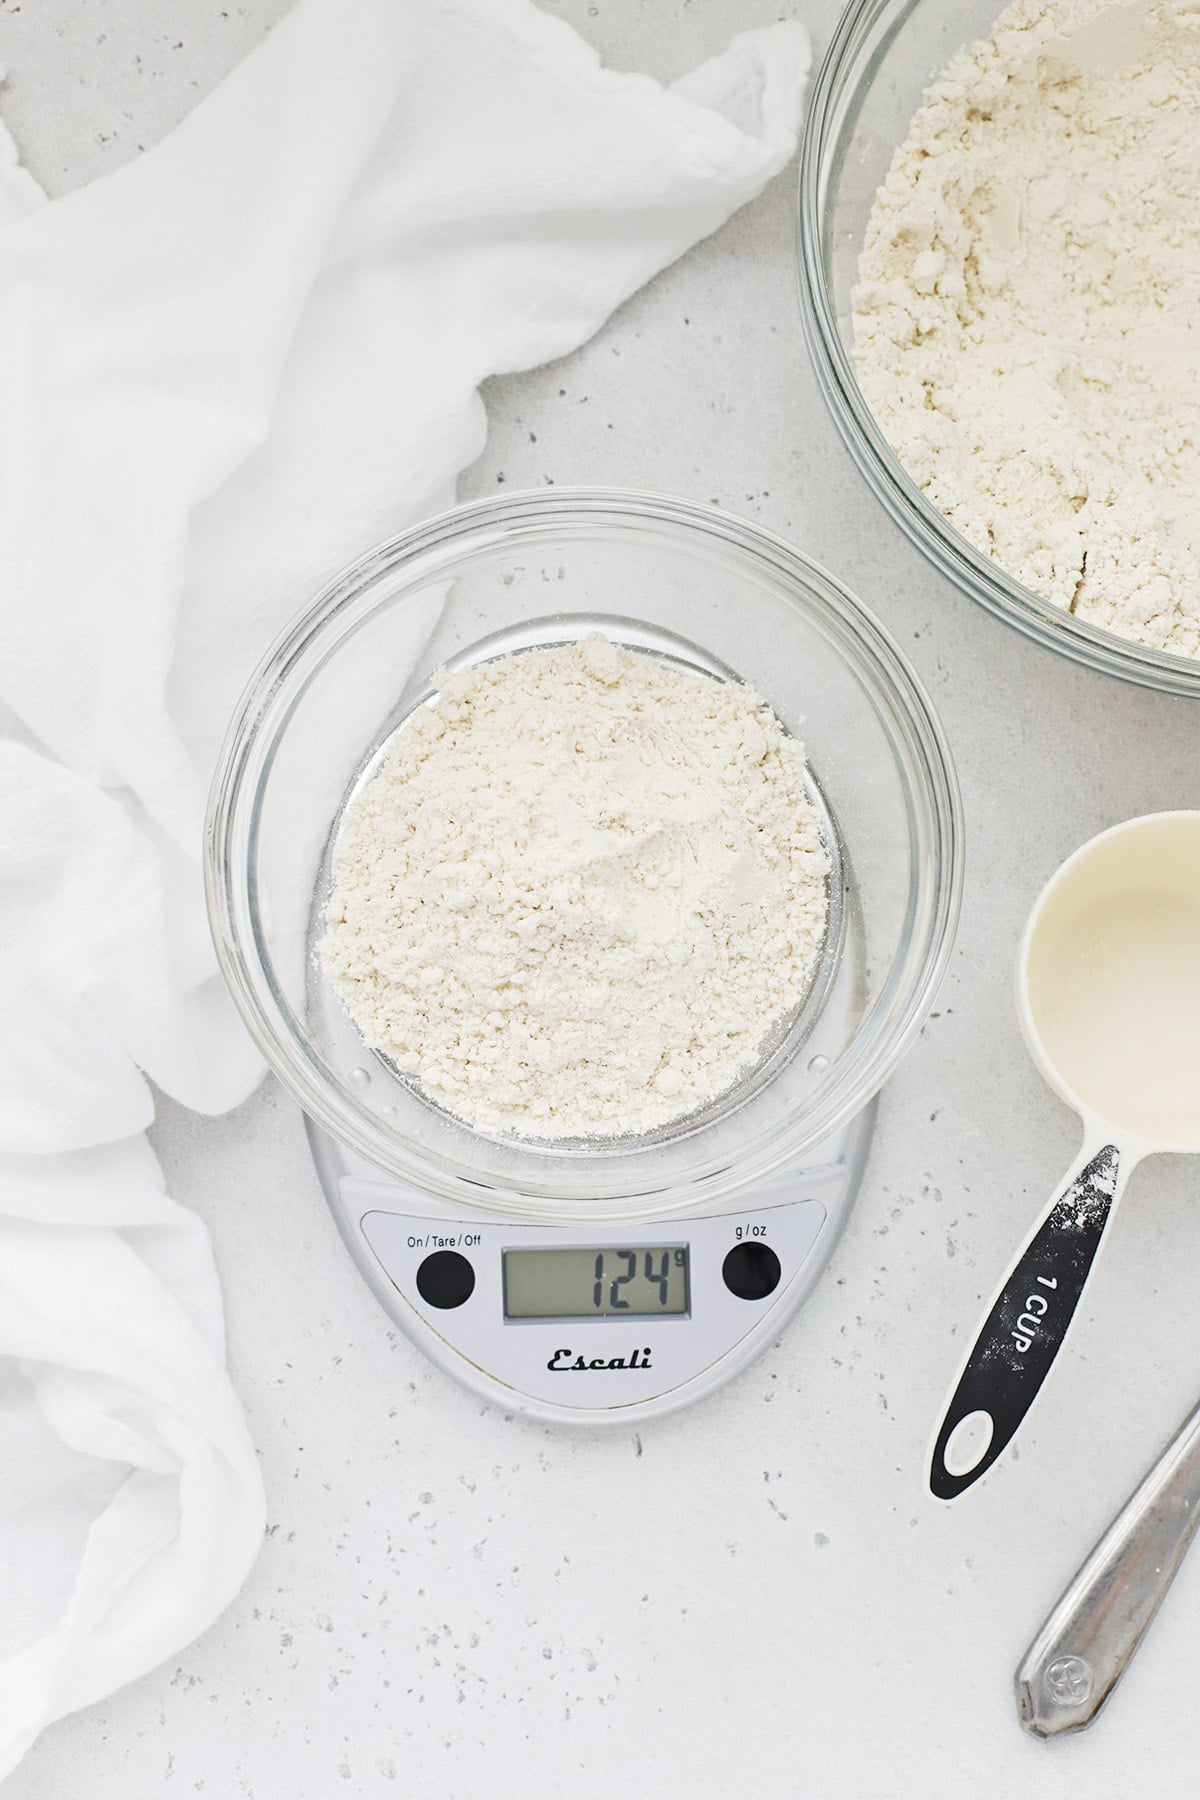 Overhead view of a bowl of flour with a measuring cup and scale for measuring properly